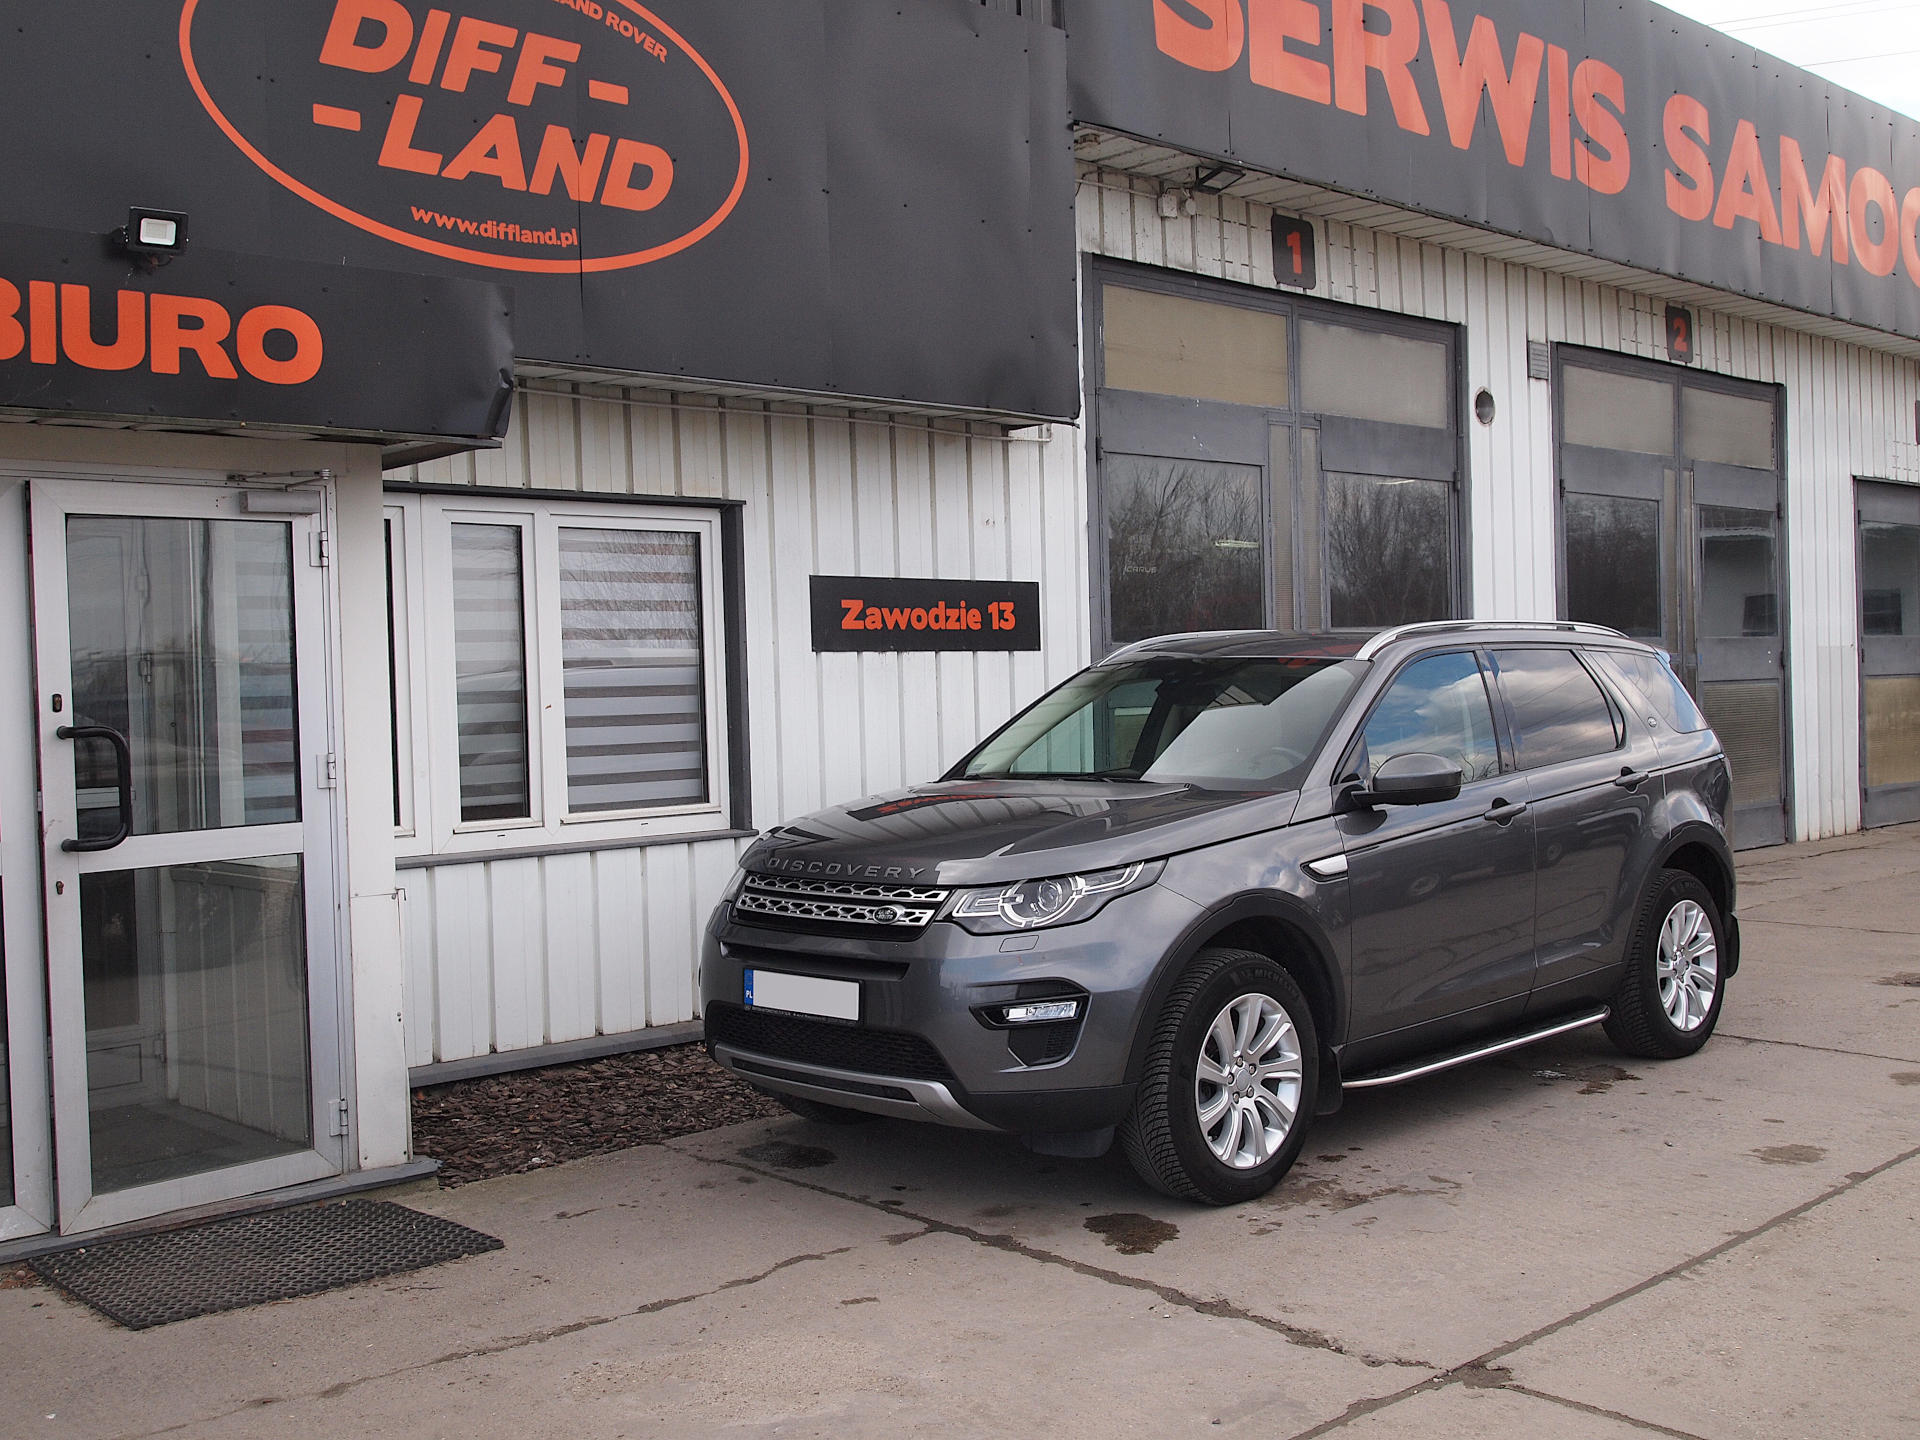 Land Rover Discovery Sport diffland.pl Serwis